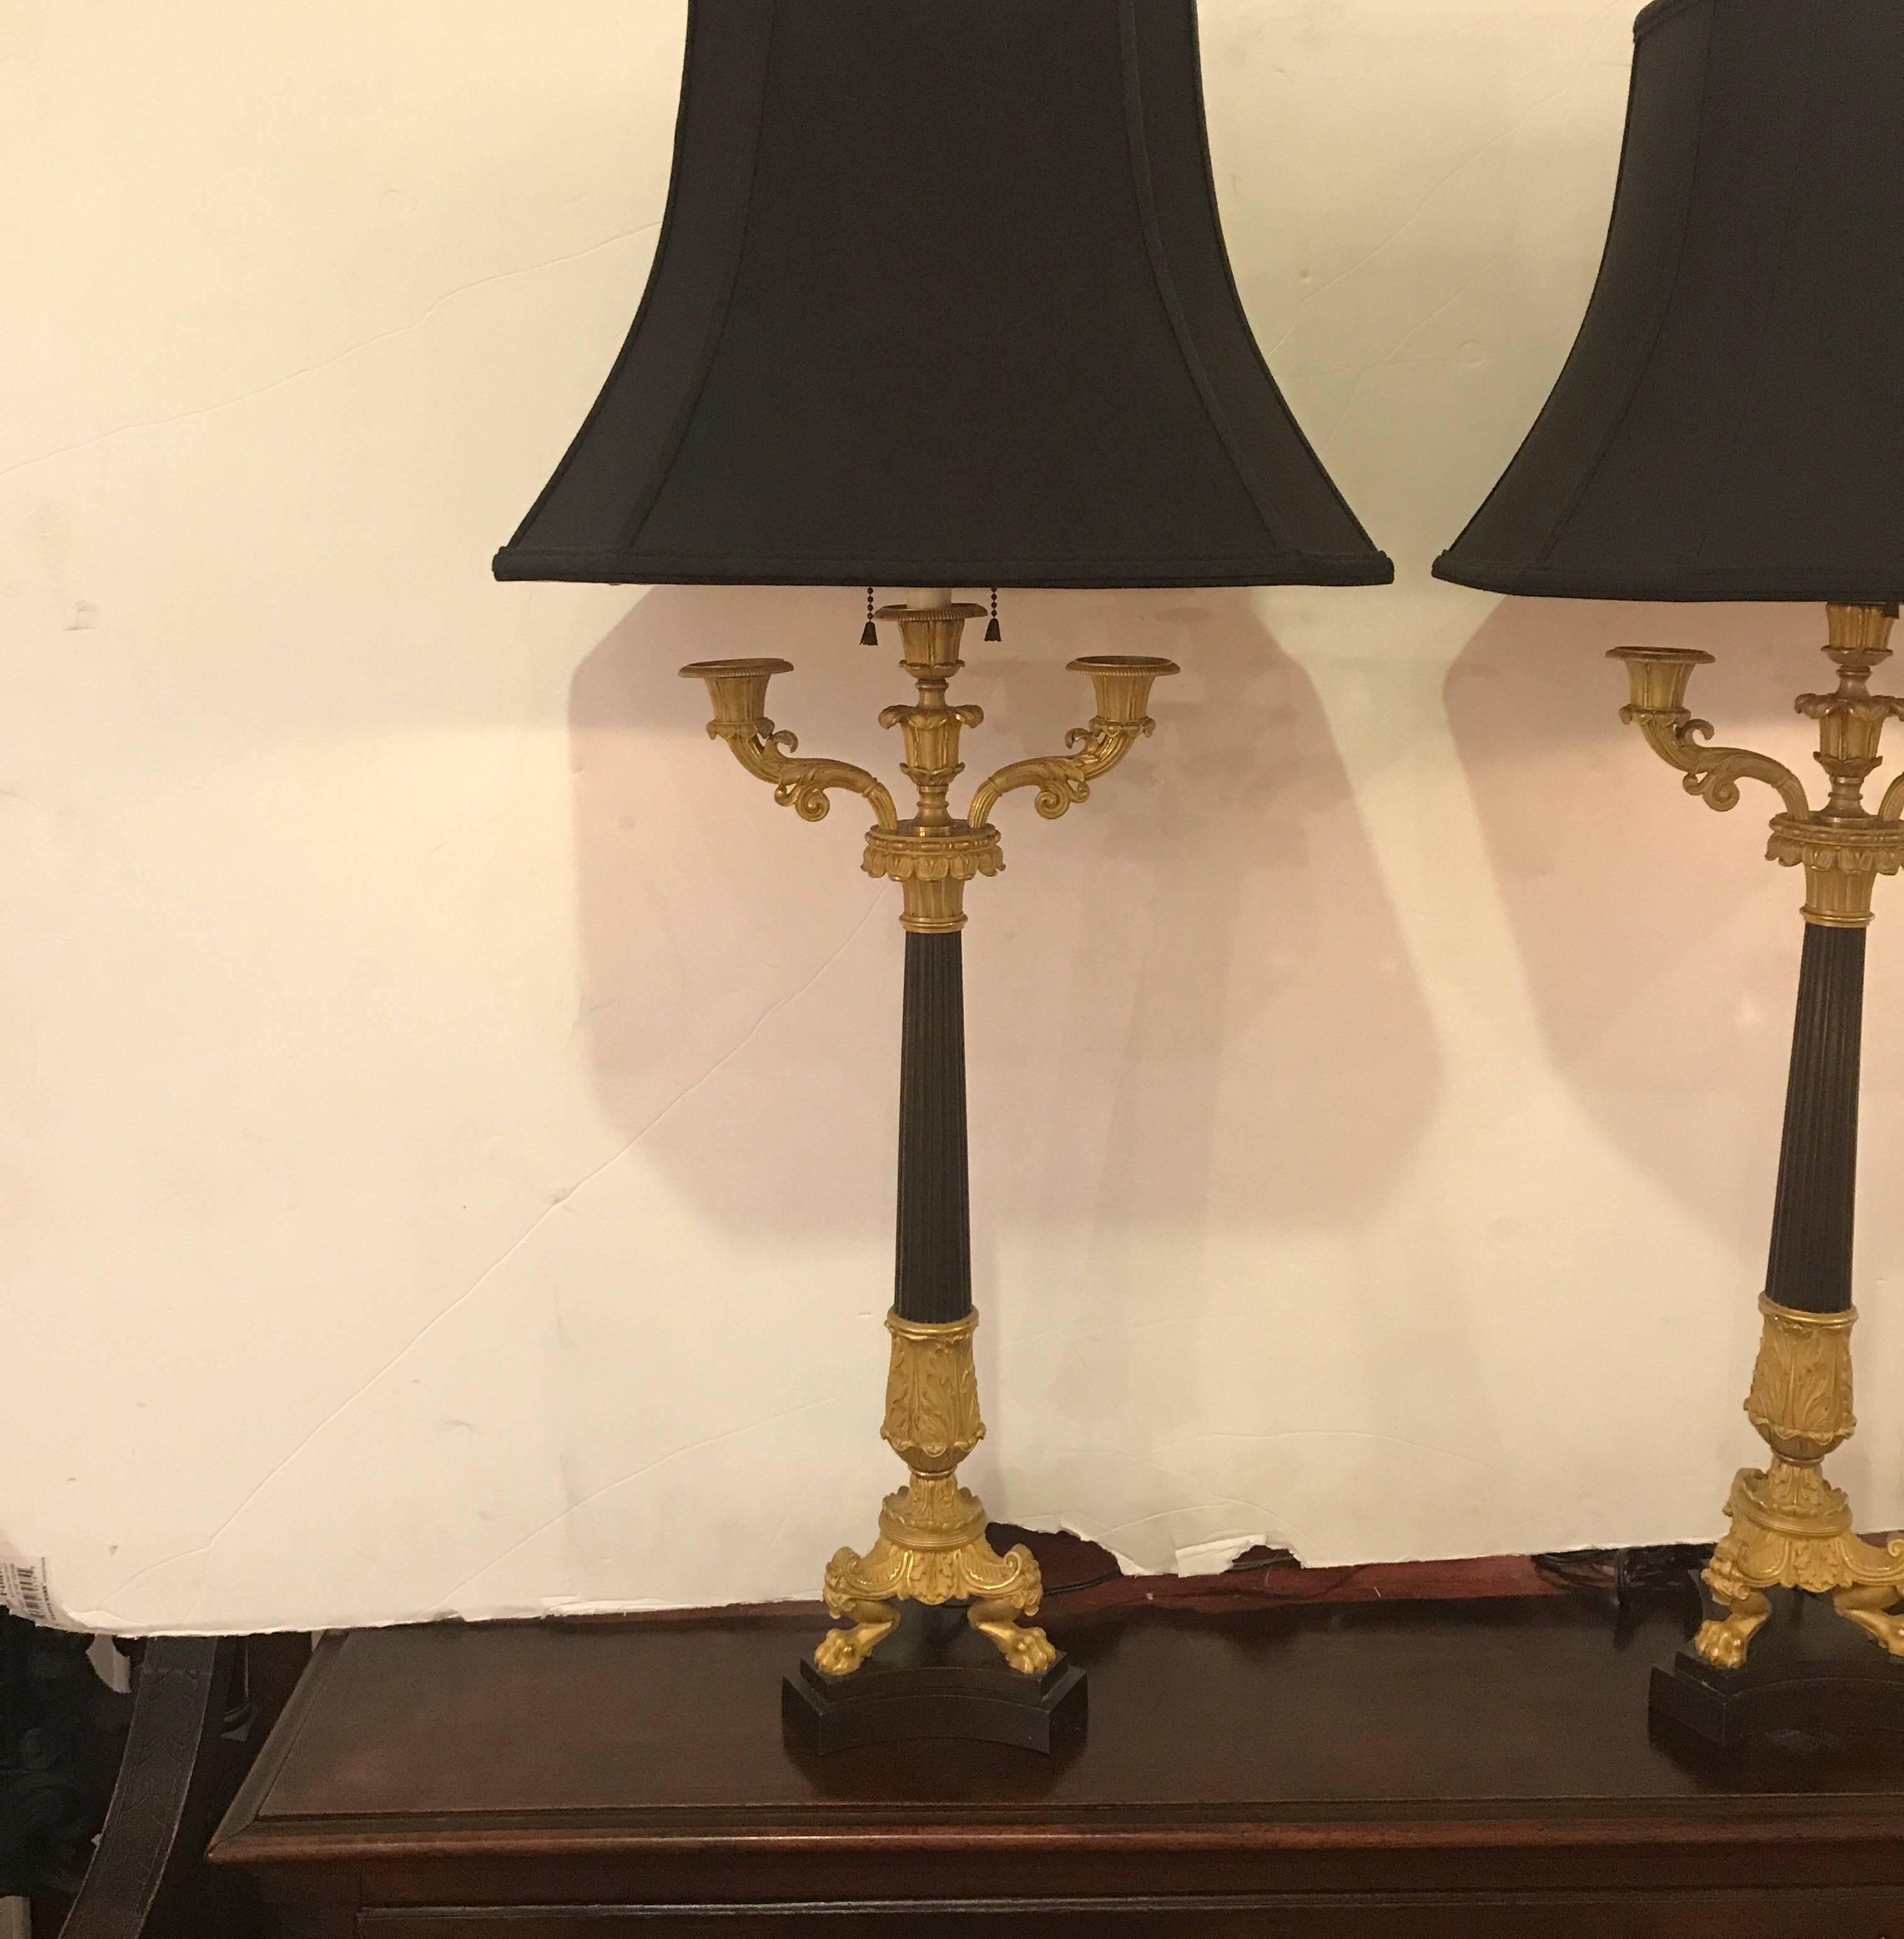 Three-arm bronze candelabra superbly cast and chased, each having three candle holders surmounted by gilt and patinated bronze columns with acanthus leaf decoration supported by a gilt tripod of lion's feet on a concave triform base with a gilt